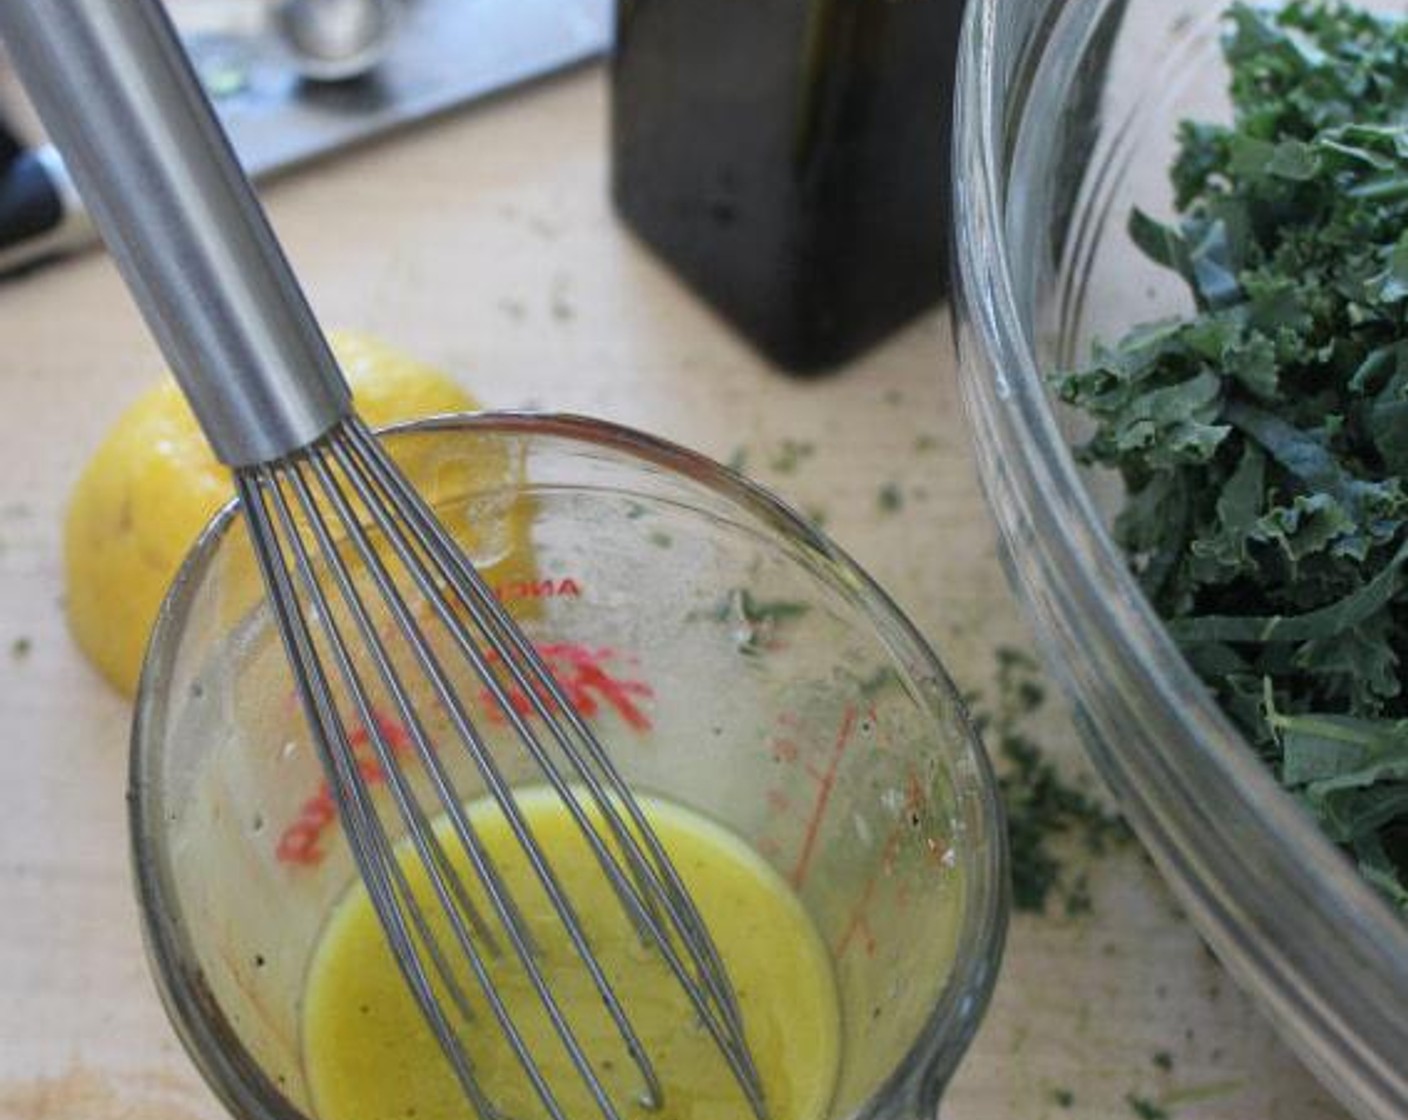 step 4 In a small, glass measuring cup, combine the juice from Lemon (1), Extra-Virgin Olive Oil (1/4 cup), Kosher Salt (3/4 tsp) andFreshly Ground Black Pepper (1/4 tsp). Whisk until smooth.